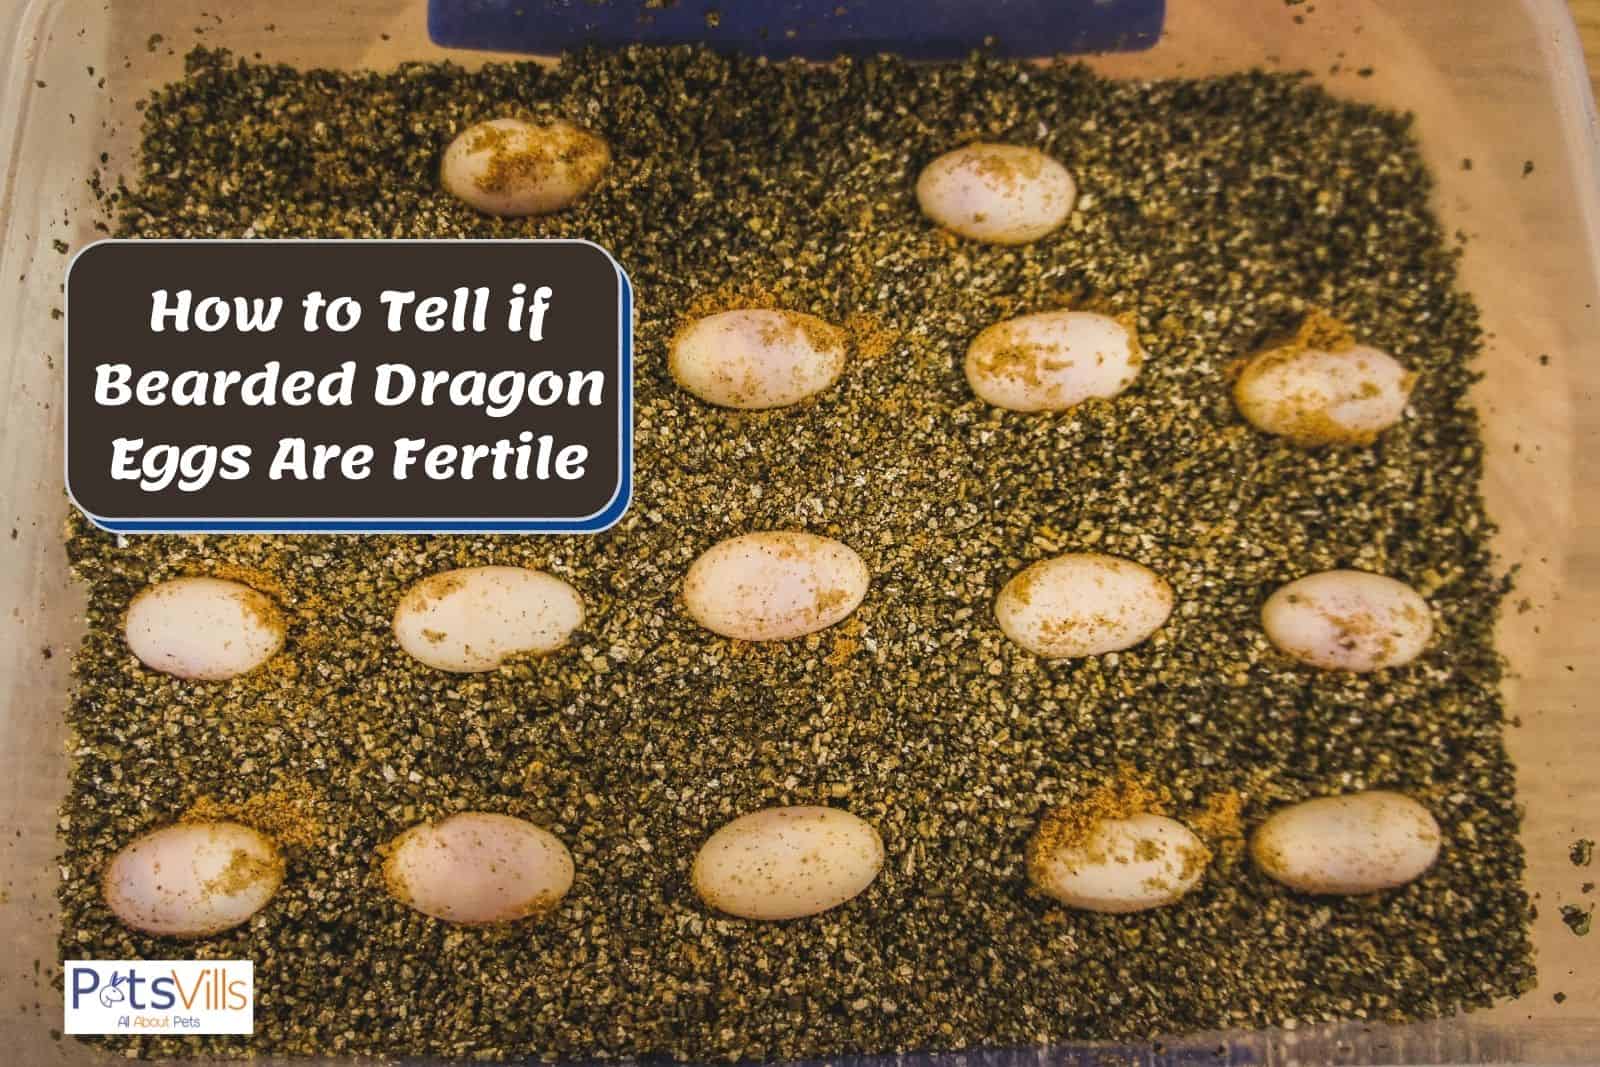 bearded dragon eggs beside How to Tell if Bearded Dragon Eggs Are Fertile text